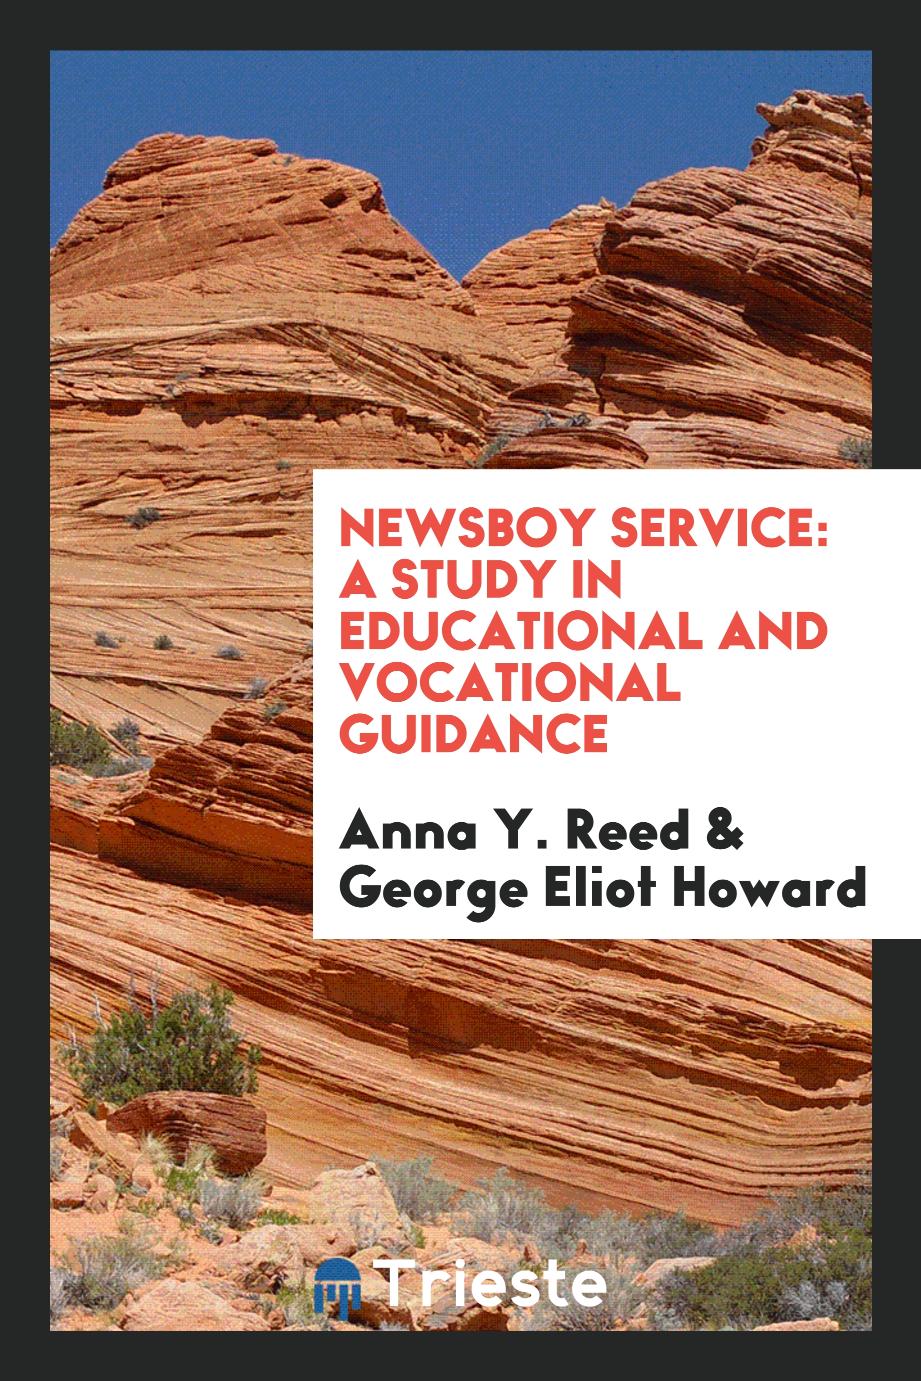 Newsboy service: a study in educational and vocational guidance